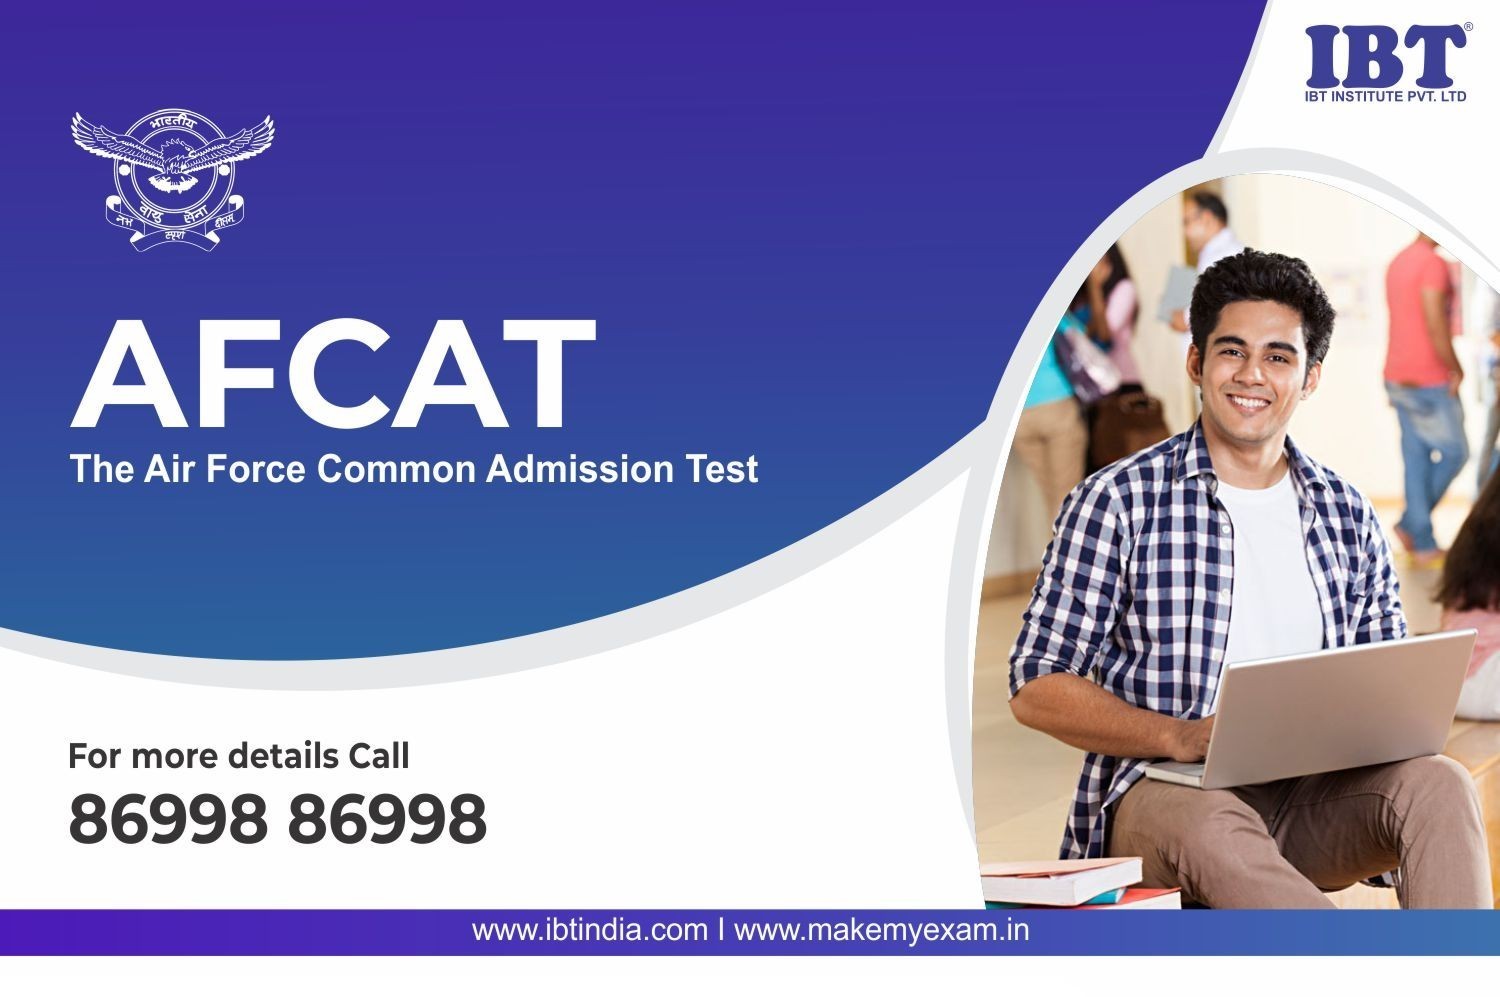 Join IBT for AFCAT Coaching in Chandigarh  